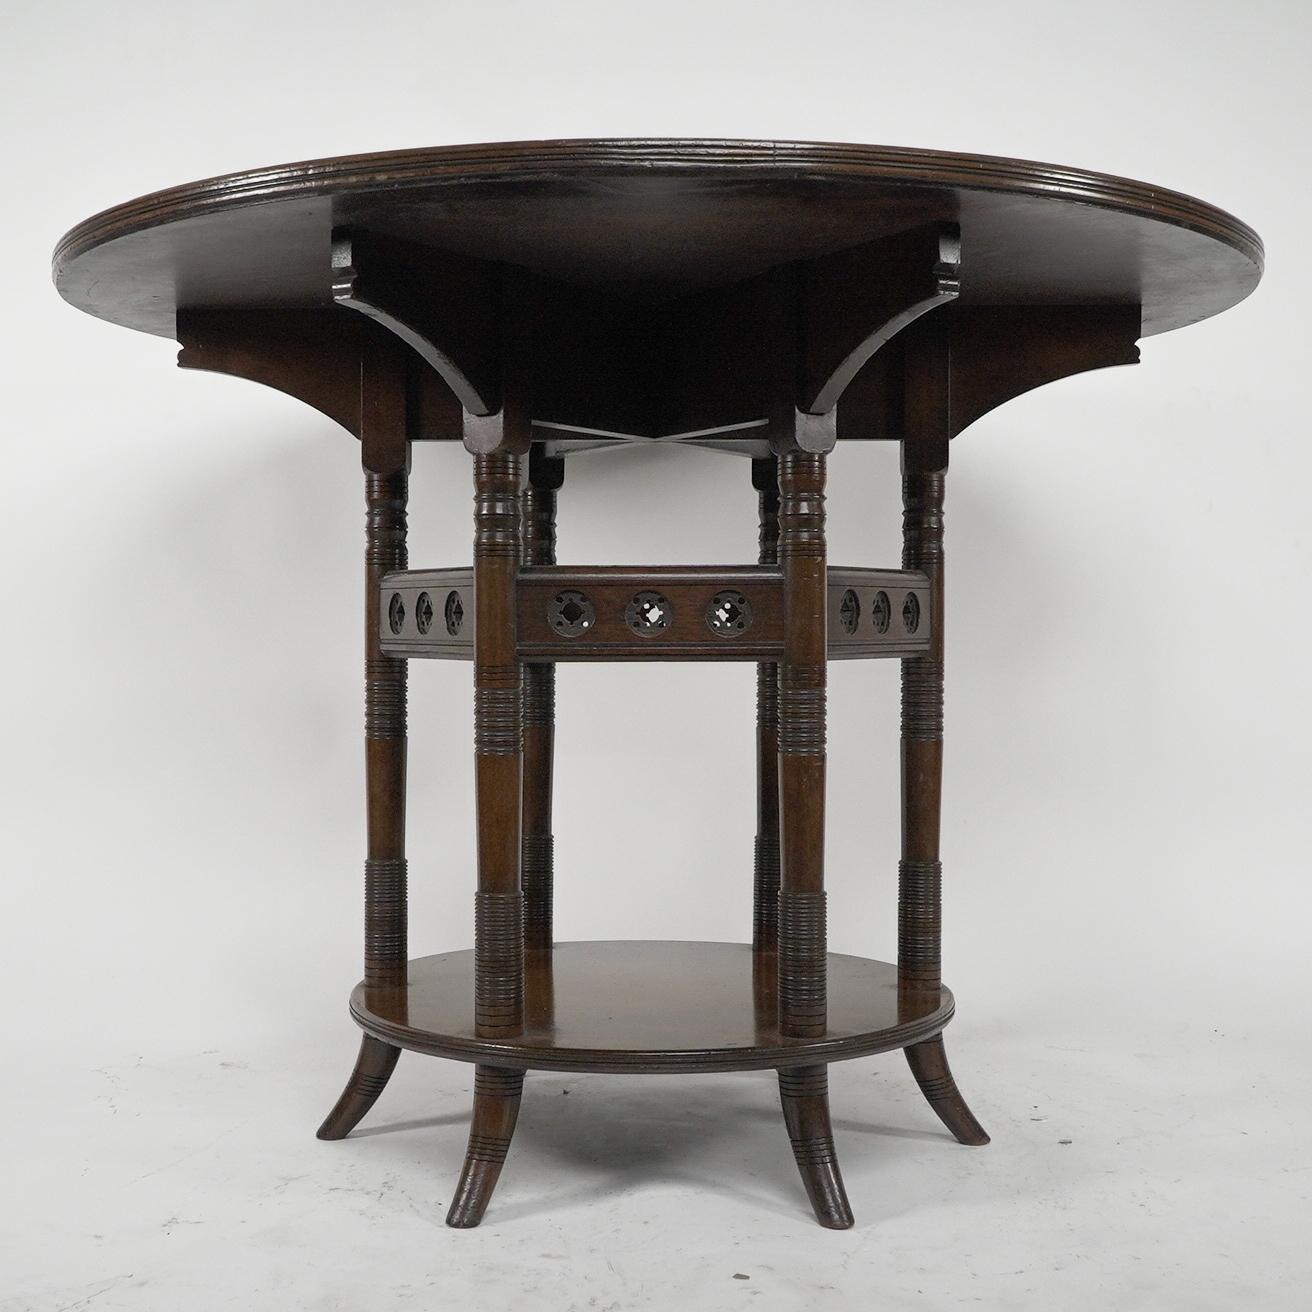 E W Godwin attributed. Made by Collinson & Lock. An Aesthetic Movement six leg walnut circular centre table with shaped radiating under supports and subtle shaped details to the ends. Stood on finely turned legs united by six upper surrounding